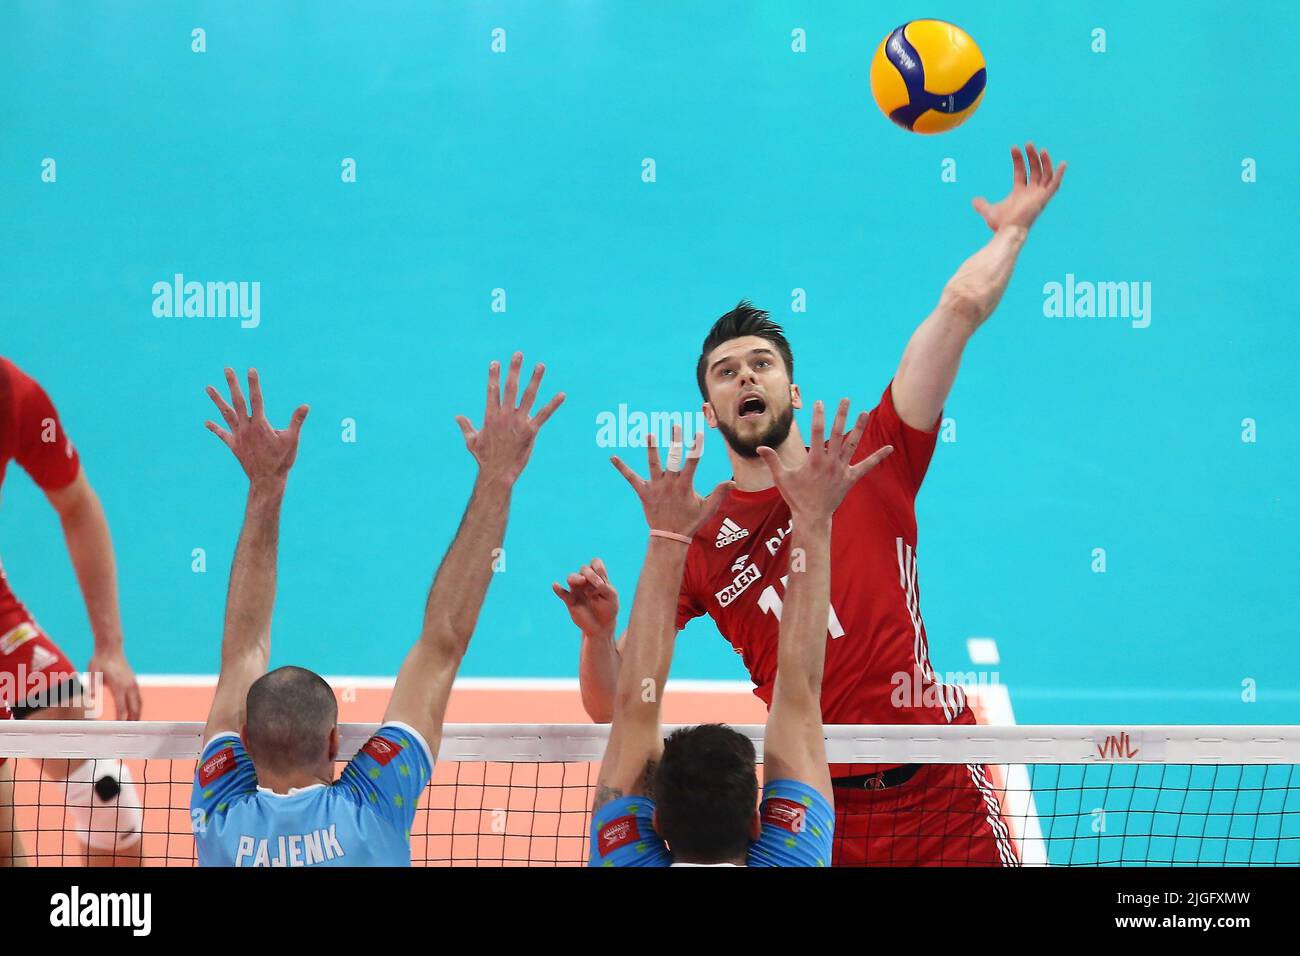 Gdansk, Poland. 10th July, 2022. Aleksander Sliwka (R) of Poland and Alen Pajenk (L) of Slovenia during the 2022 men's FIVB Volleyball Nations League match between Poland and Slovenia in Gdansk, Poland, 10 July 2022. Credit: PAP/Alamy Live News Stock Photo